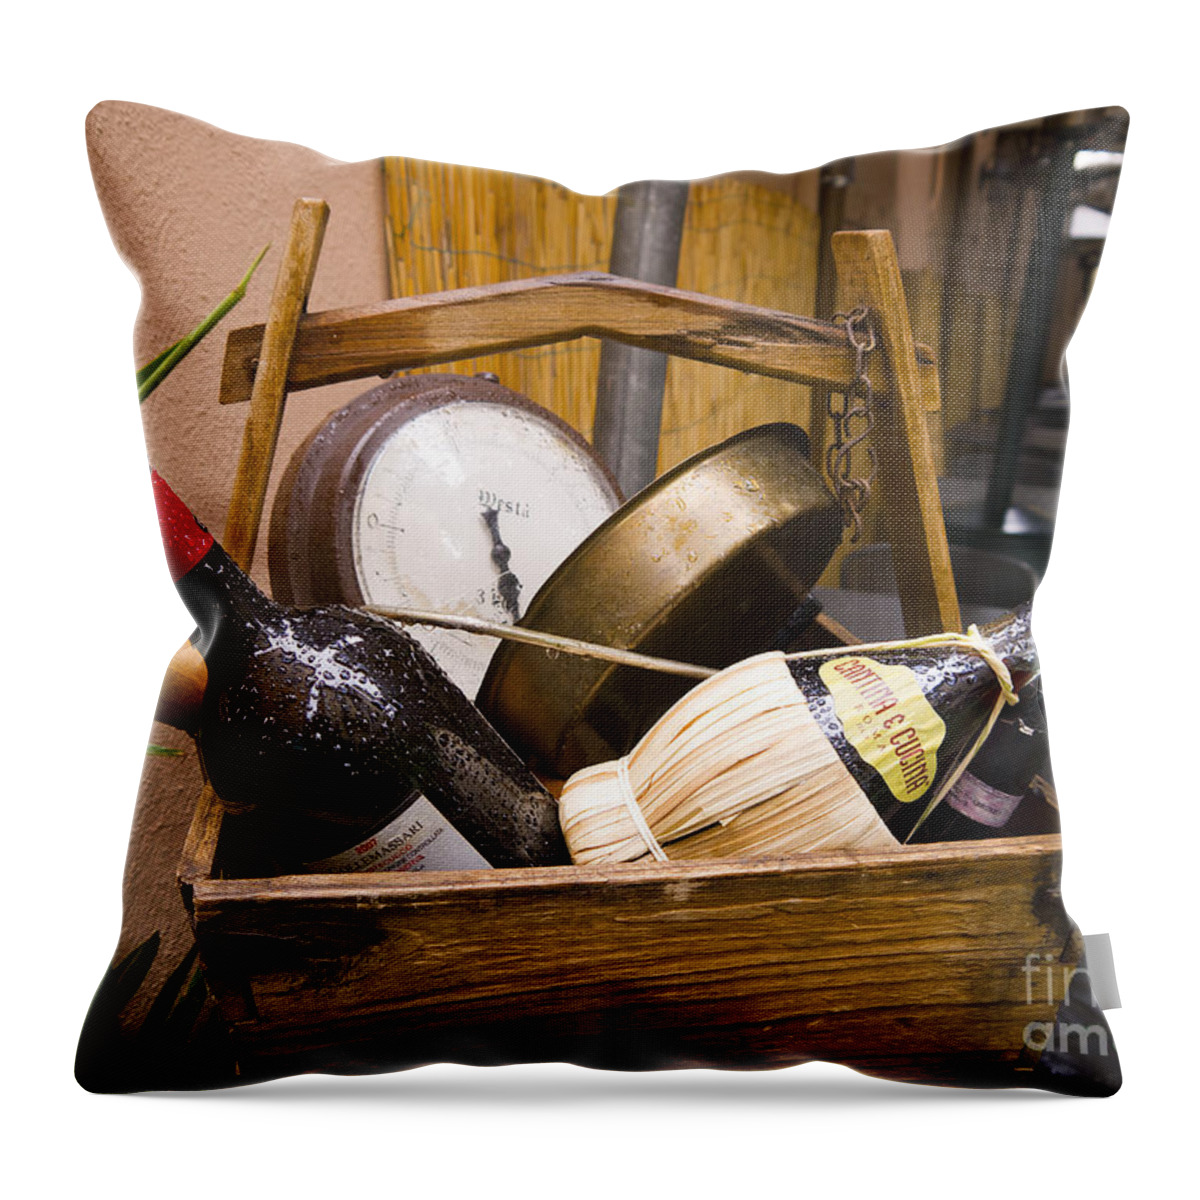 Bottle Throw Pillow featuring the photograph Even Italian Garbage is Classy by Brenda Kean